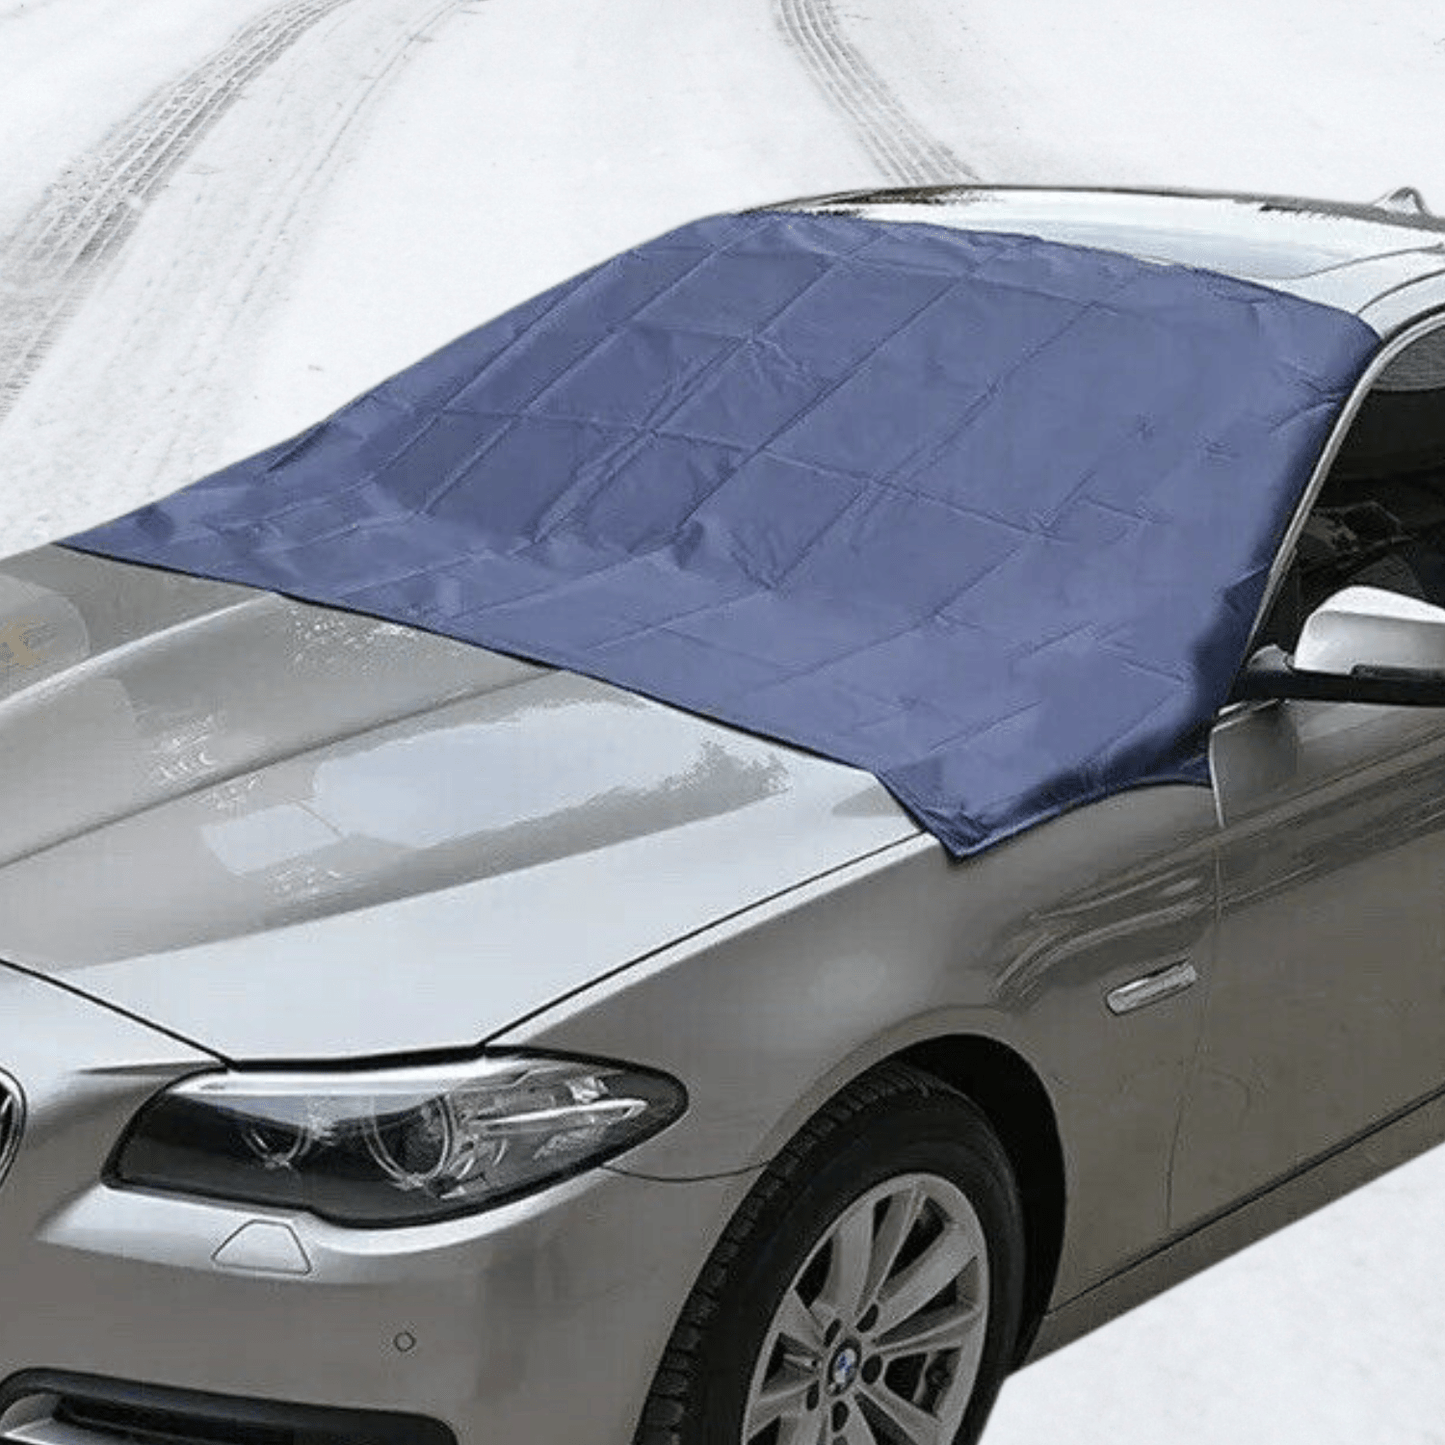 Full Coverage Magnetic Winter Windshield Snow Protector Cover - Merchandise Plug